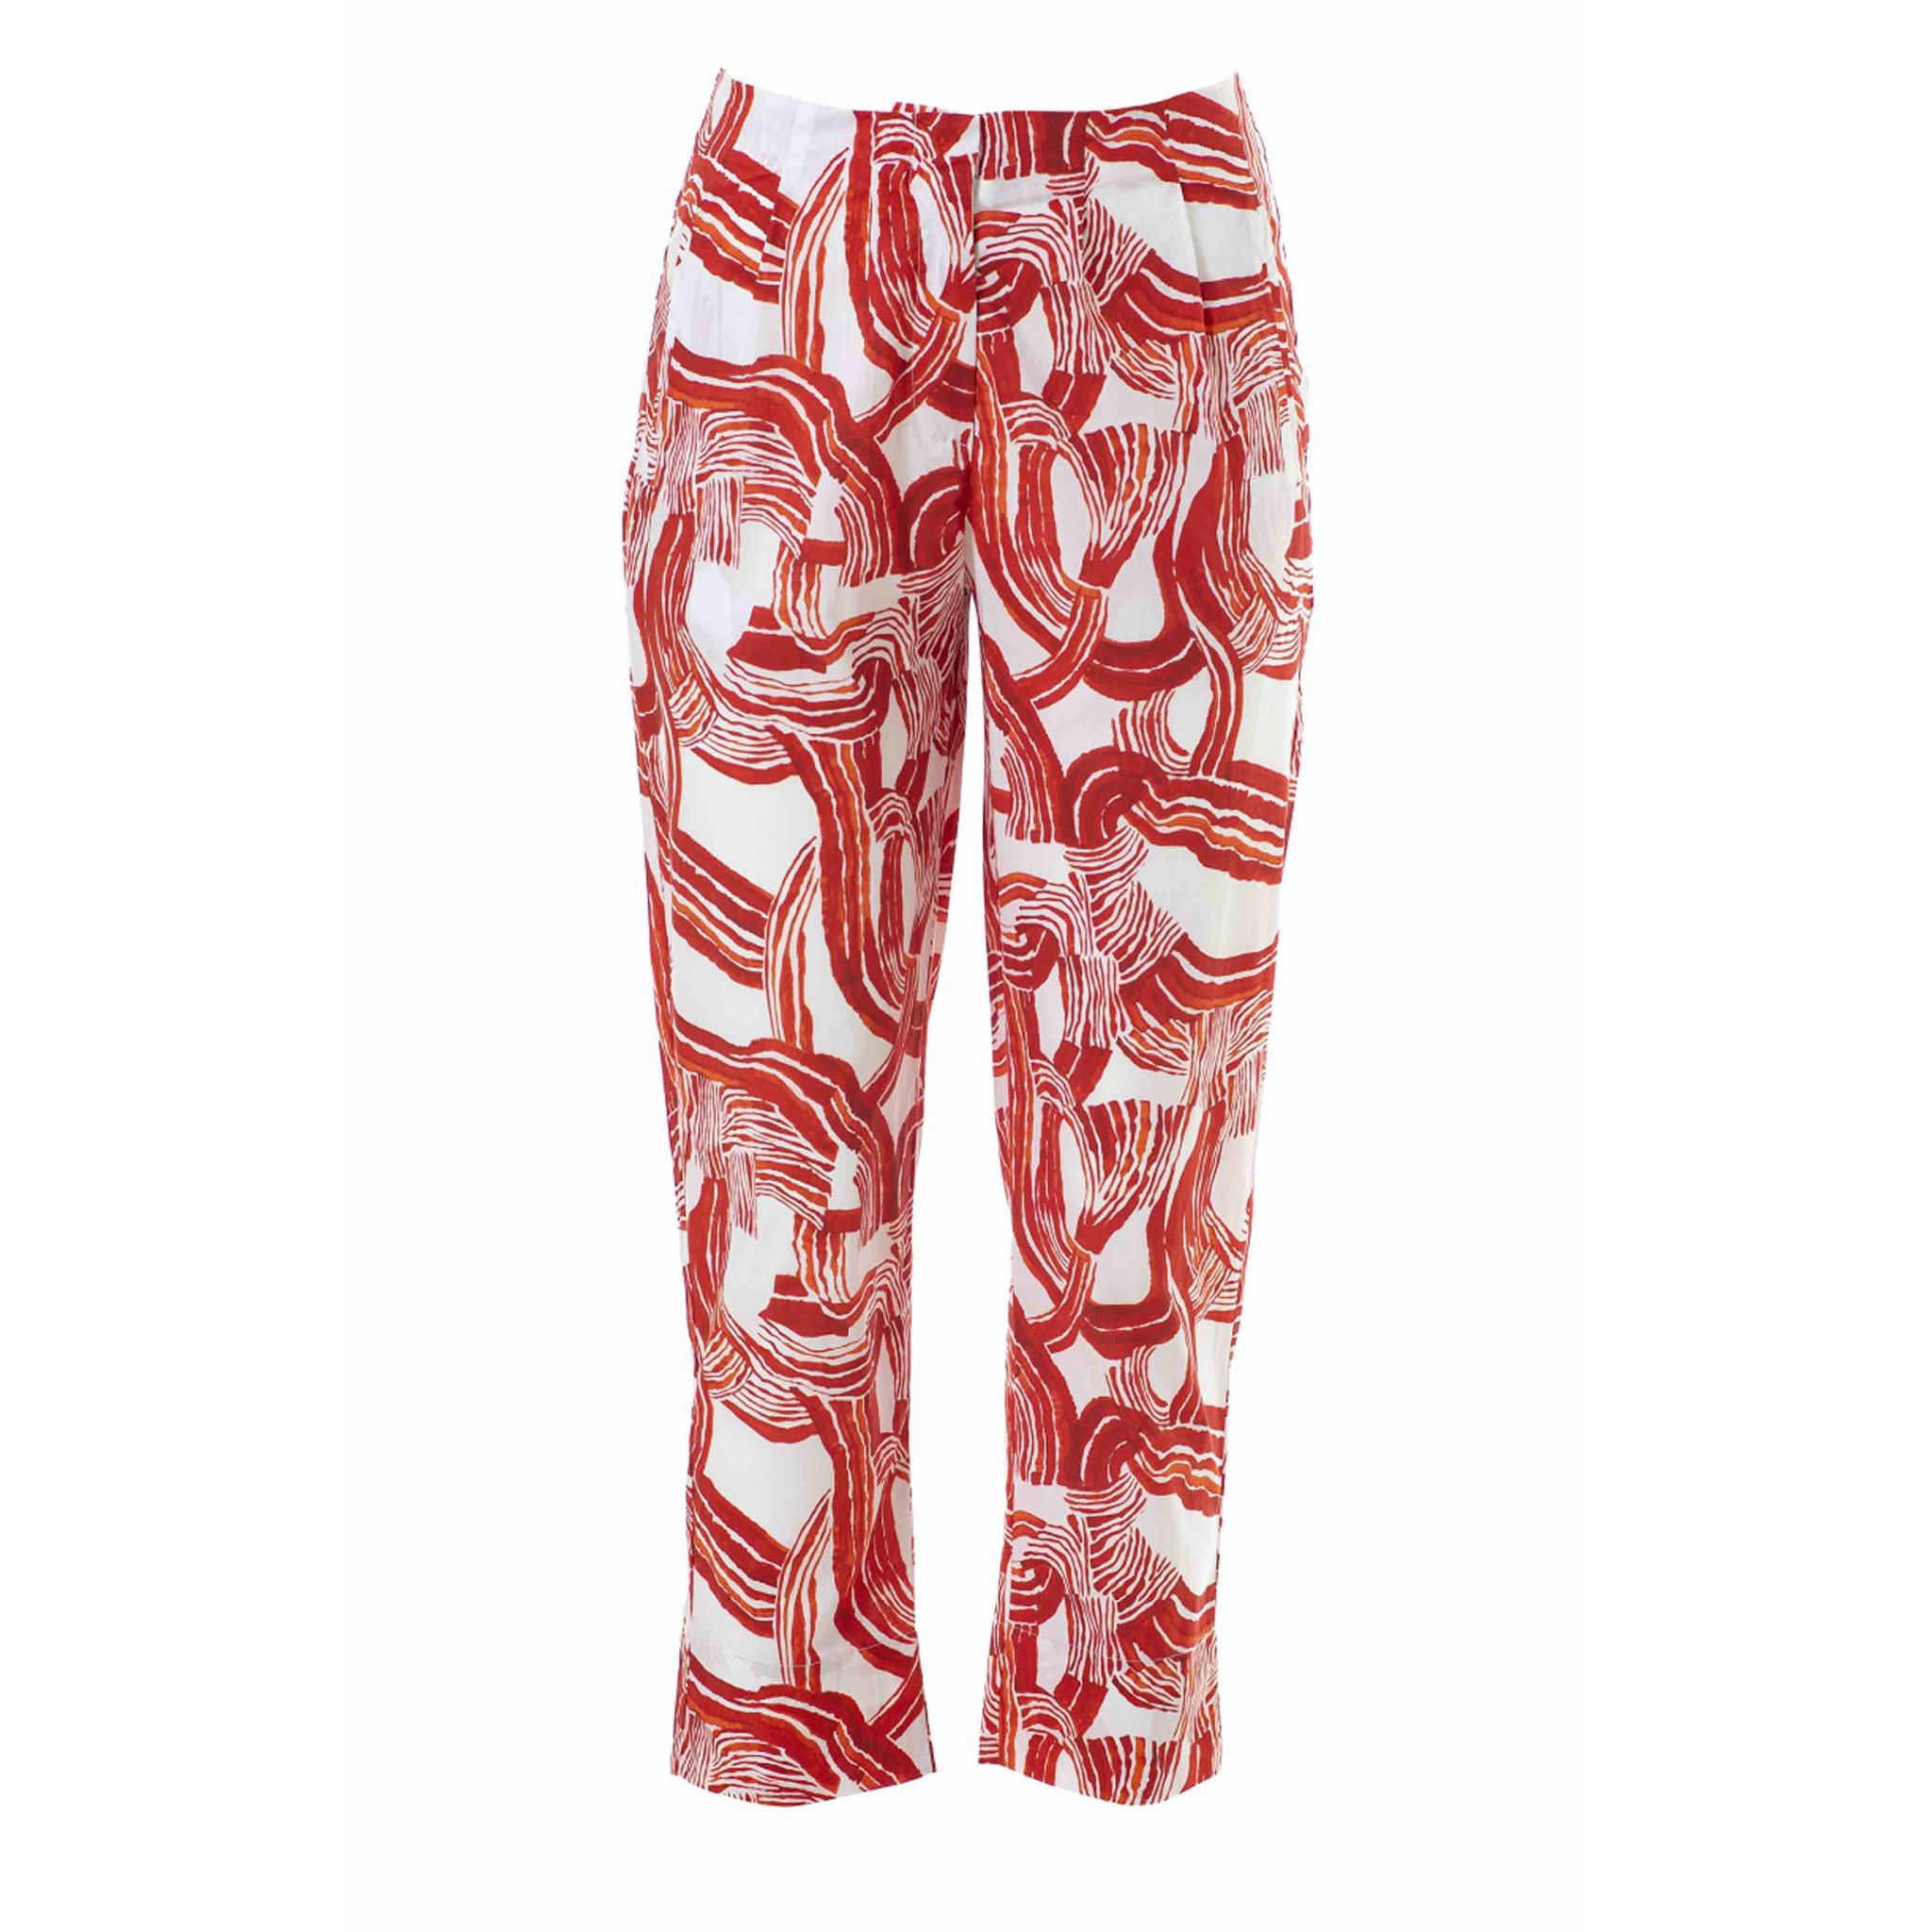 Mecca trousers Jc SOPHIE